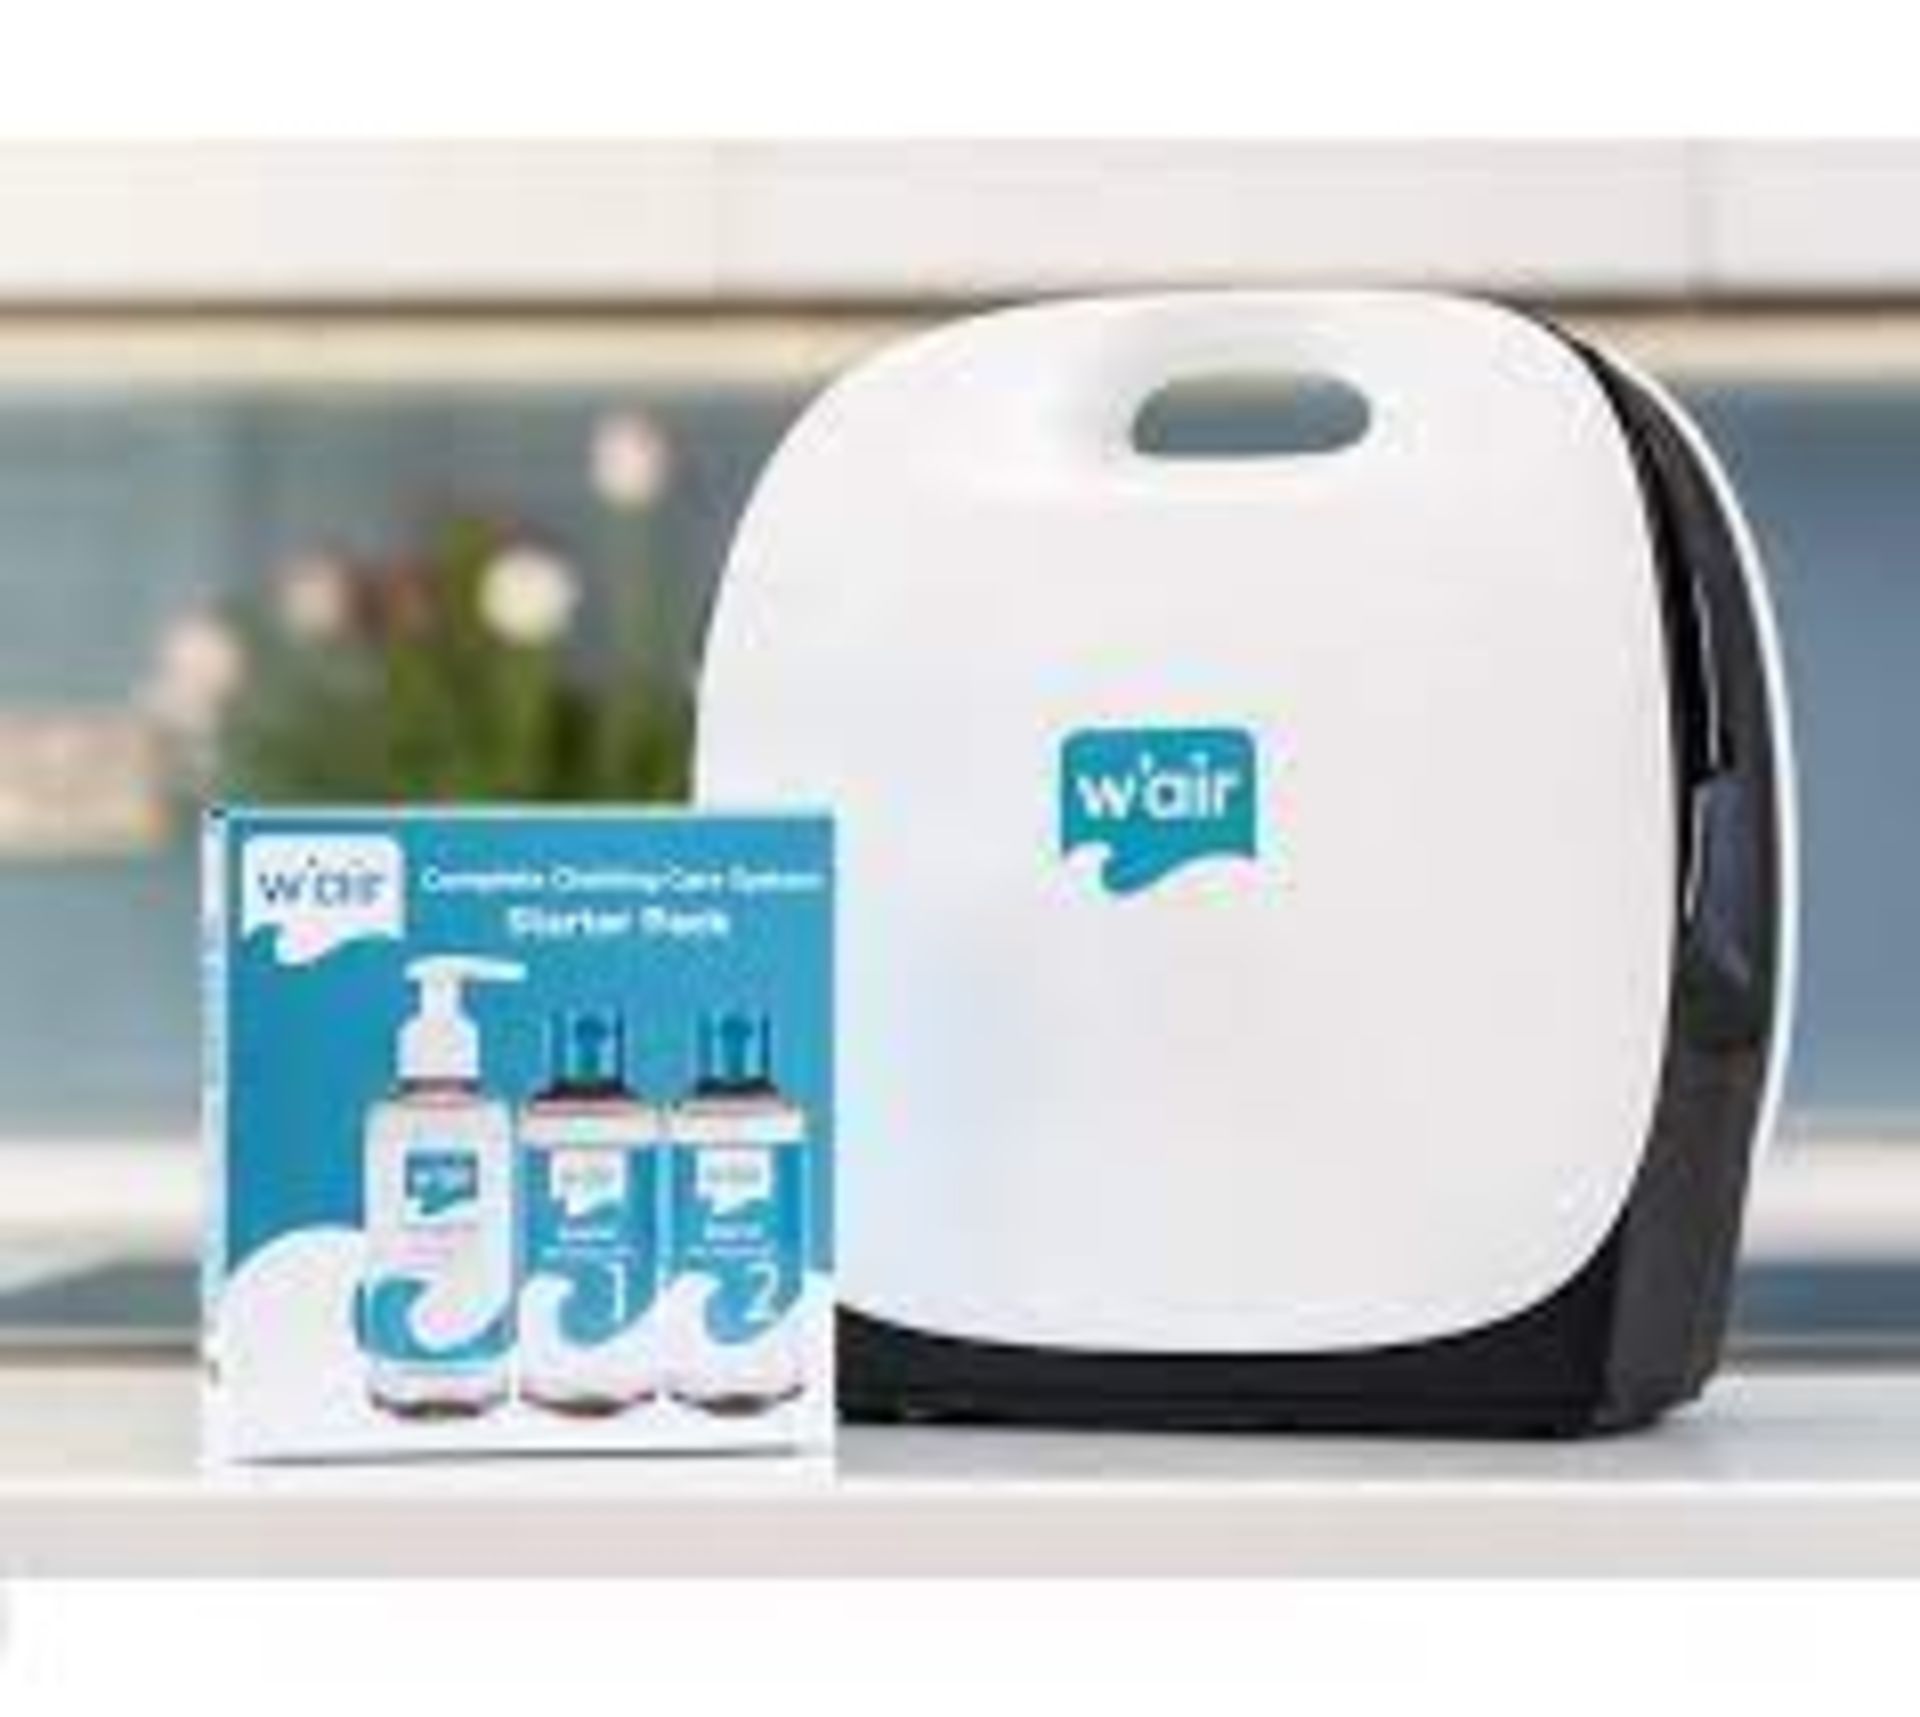 5 X BRAND NEW W'AIR SNEAKER CLEANING SYSTEMS RRP £299, The w'air uses hydrodynamic technology - Bild 5 aus 6